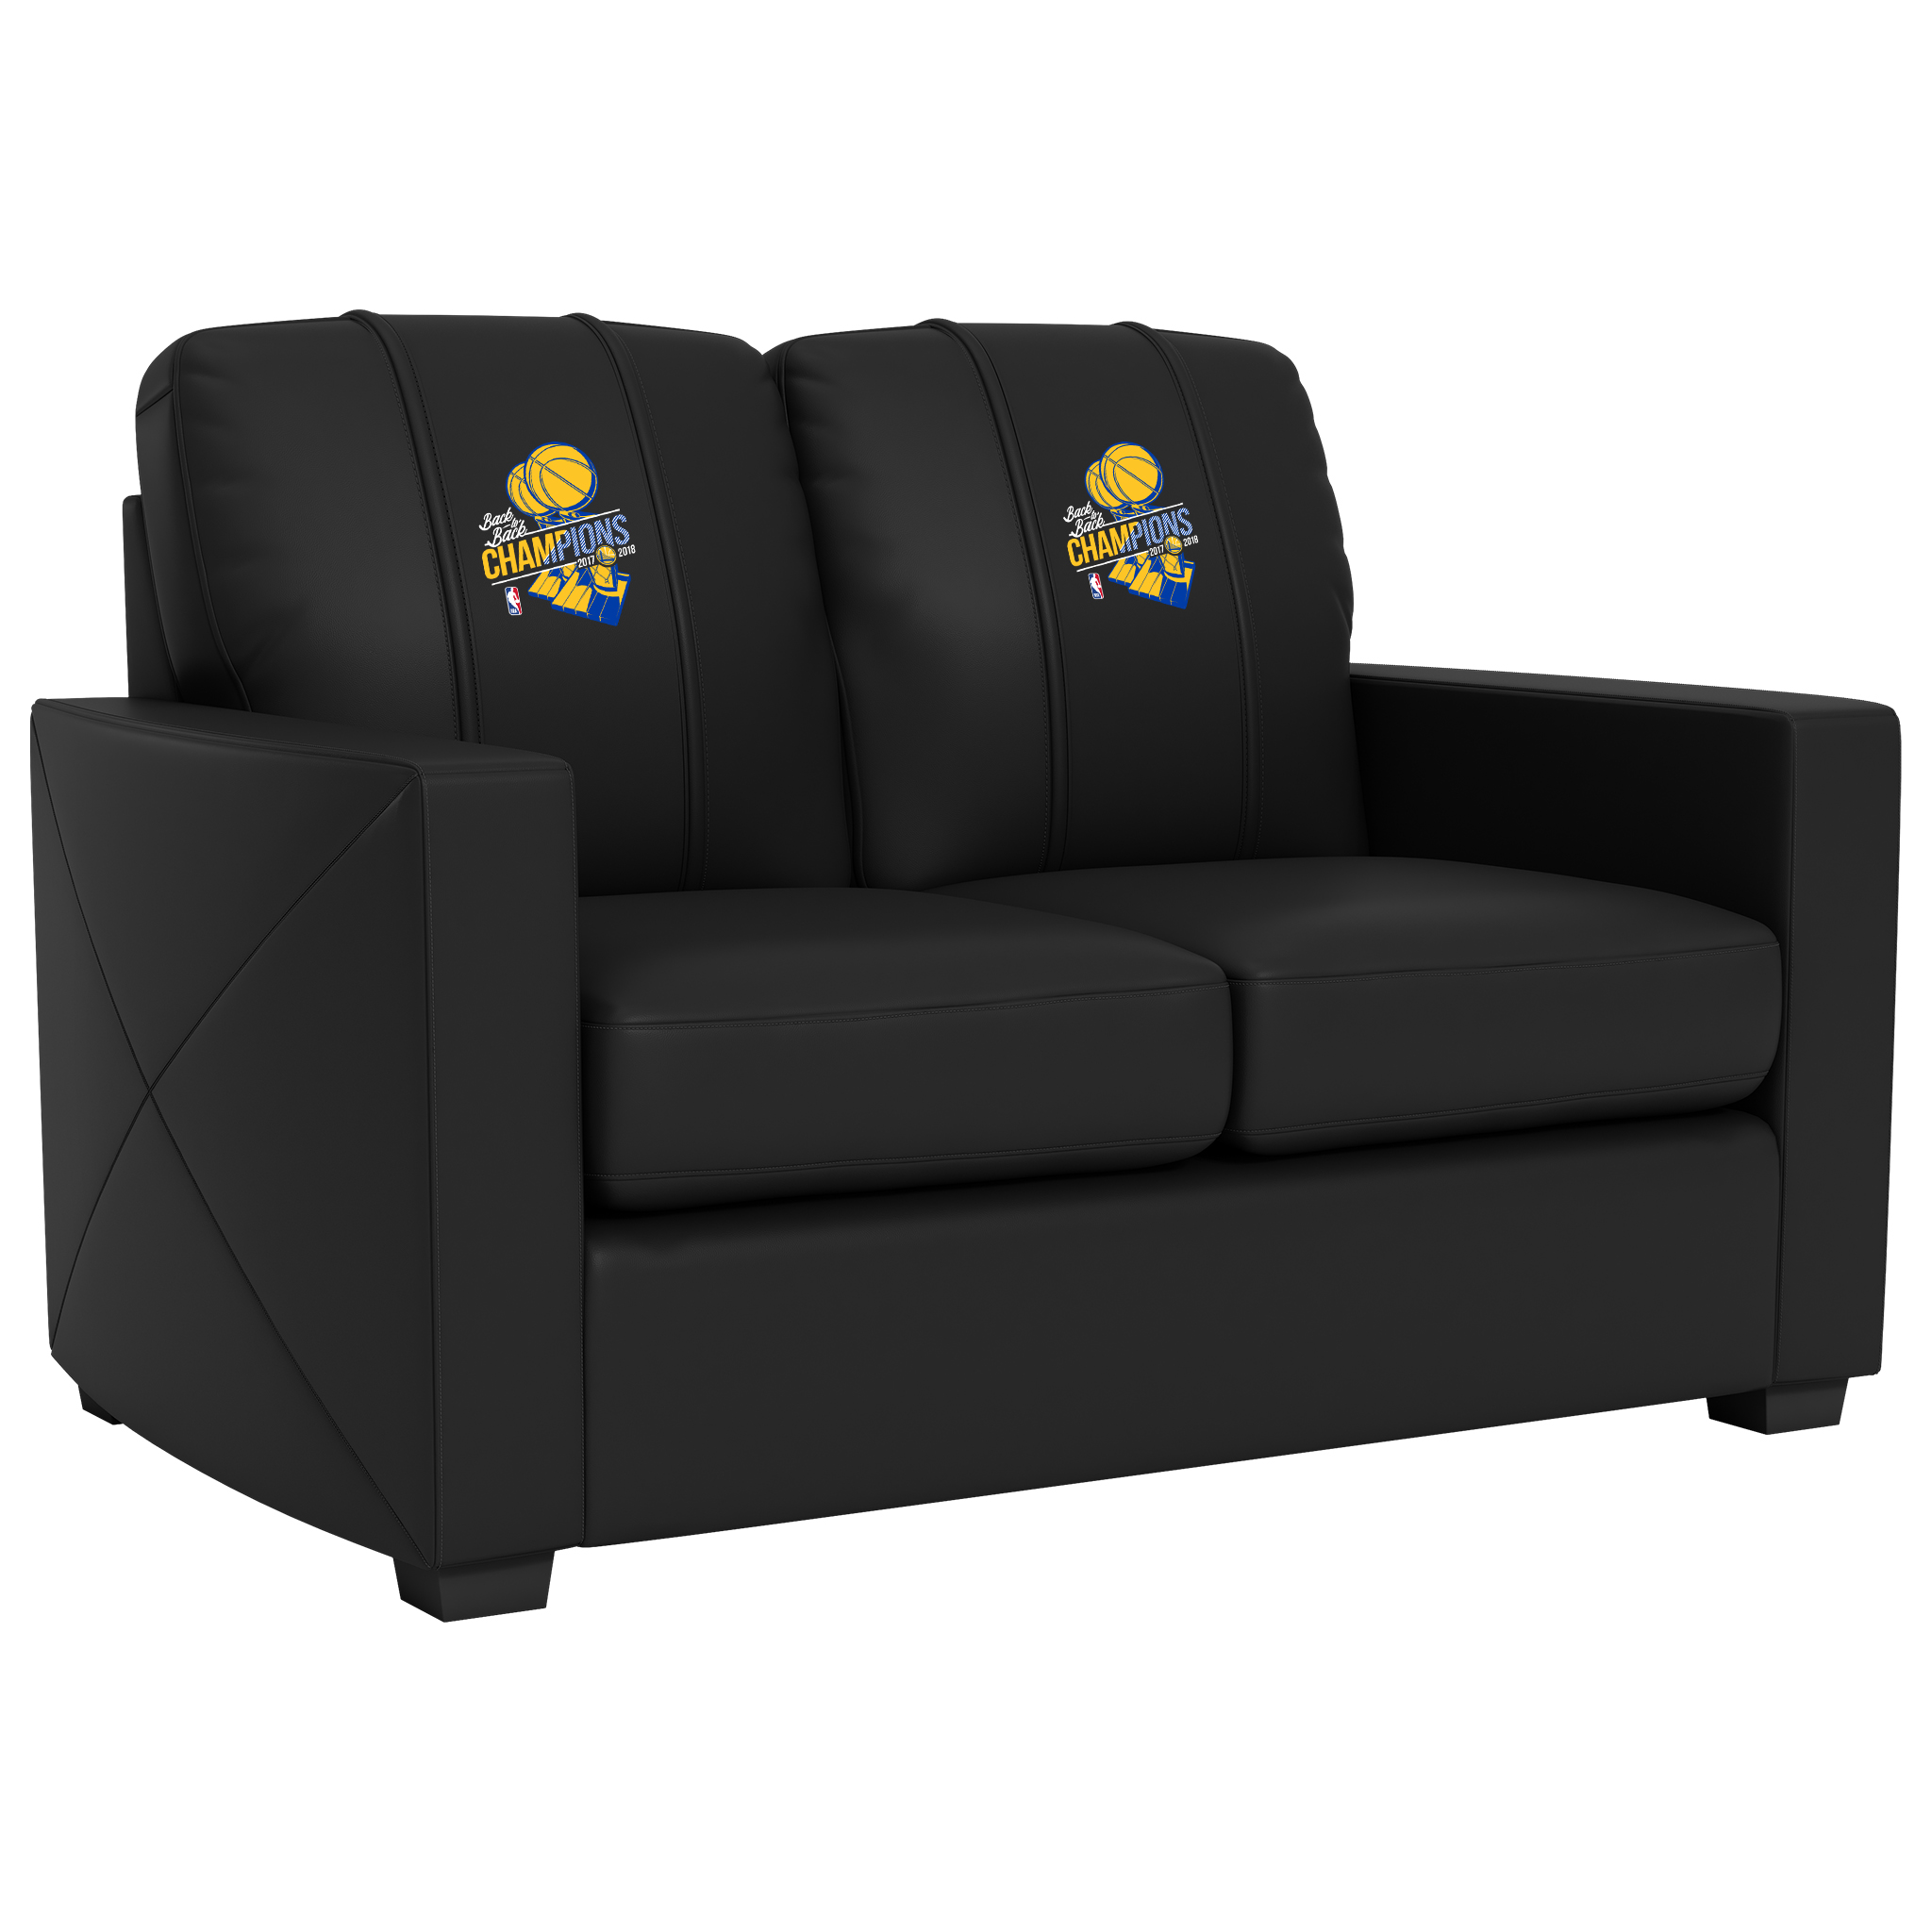 Golden State Warriors  Silver Loveseat with Golden State Warriors 2018 Champions Logo Panel